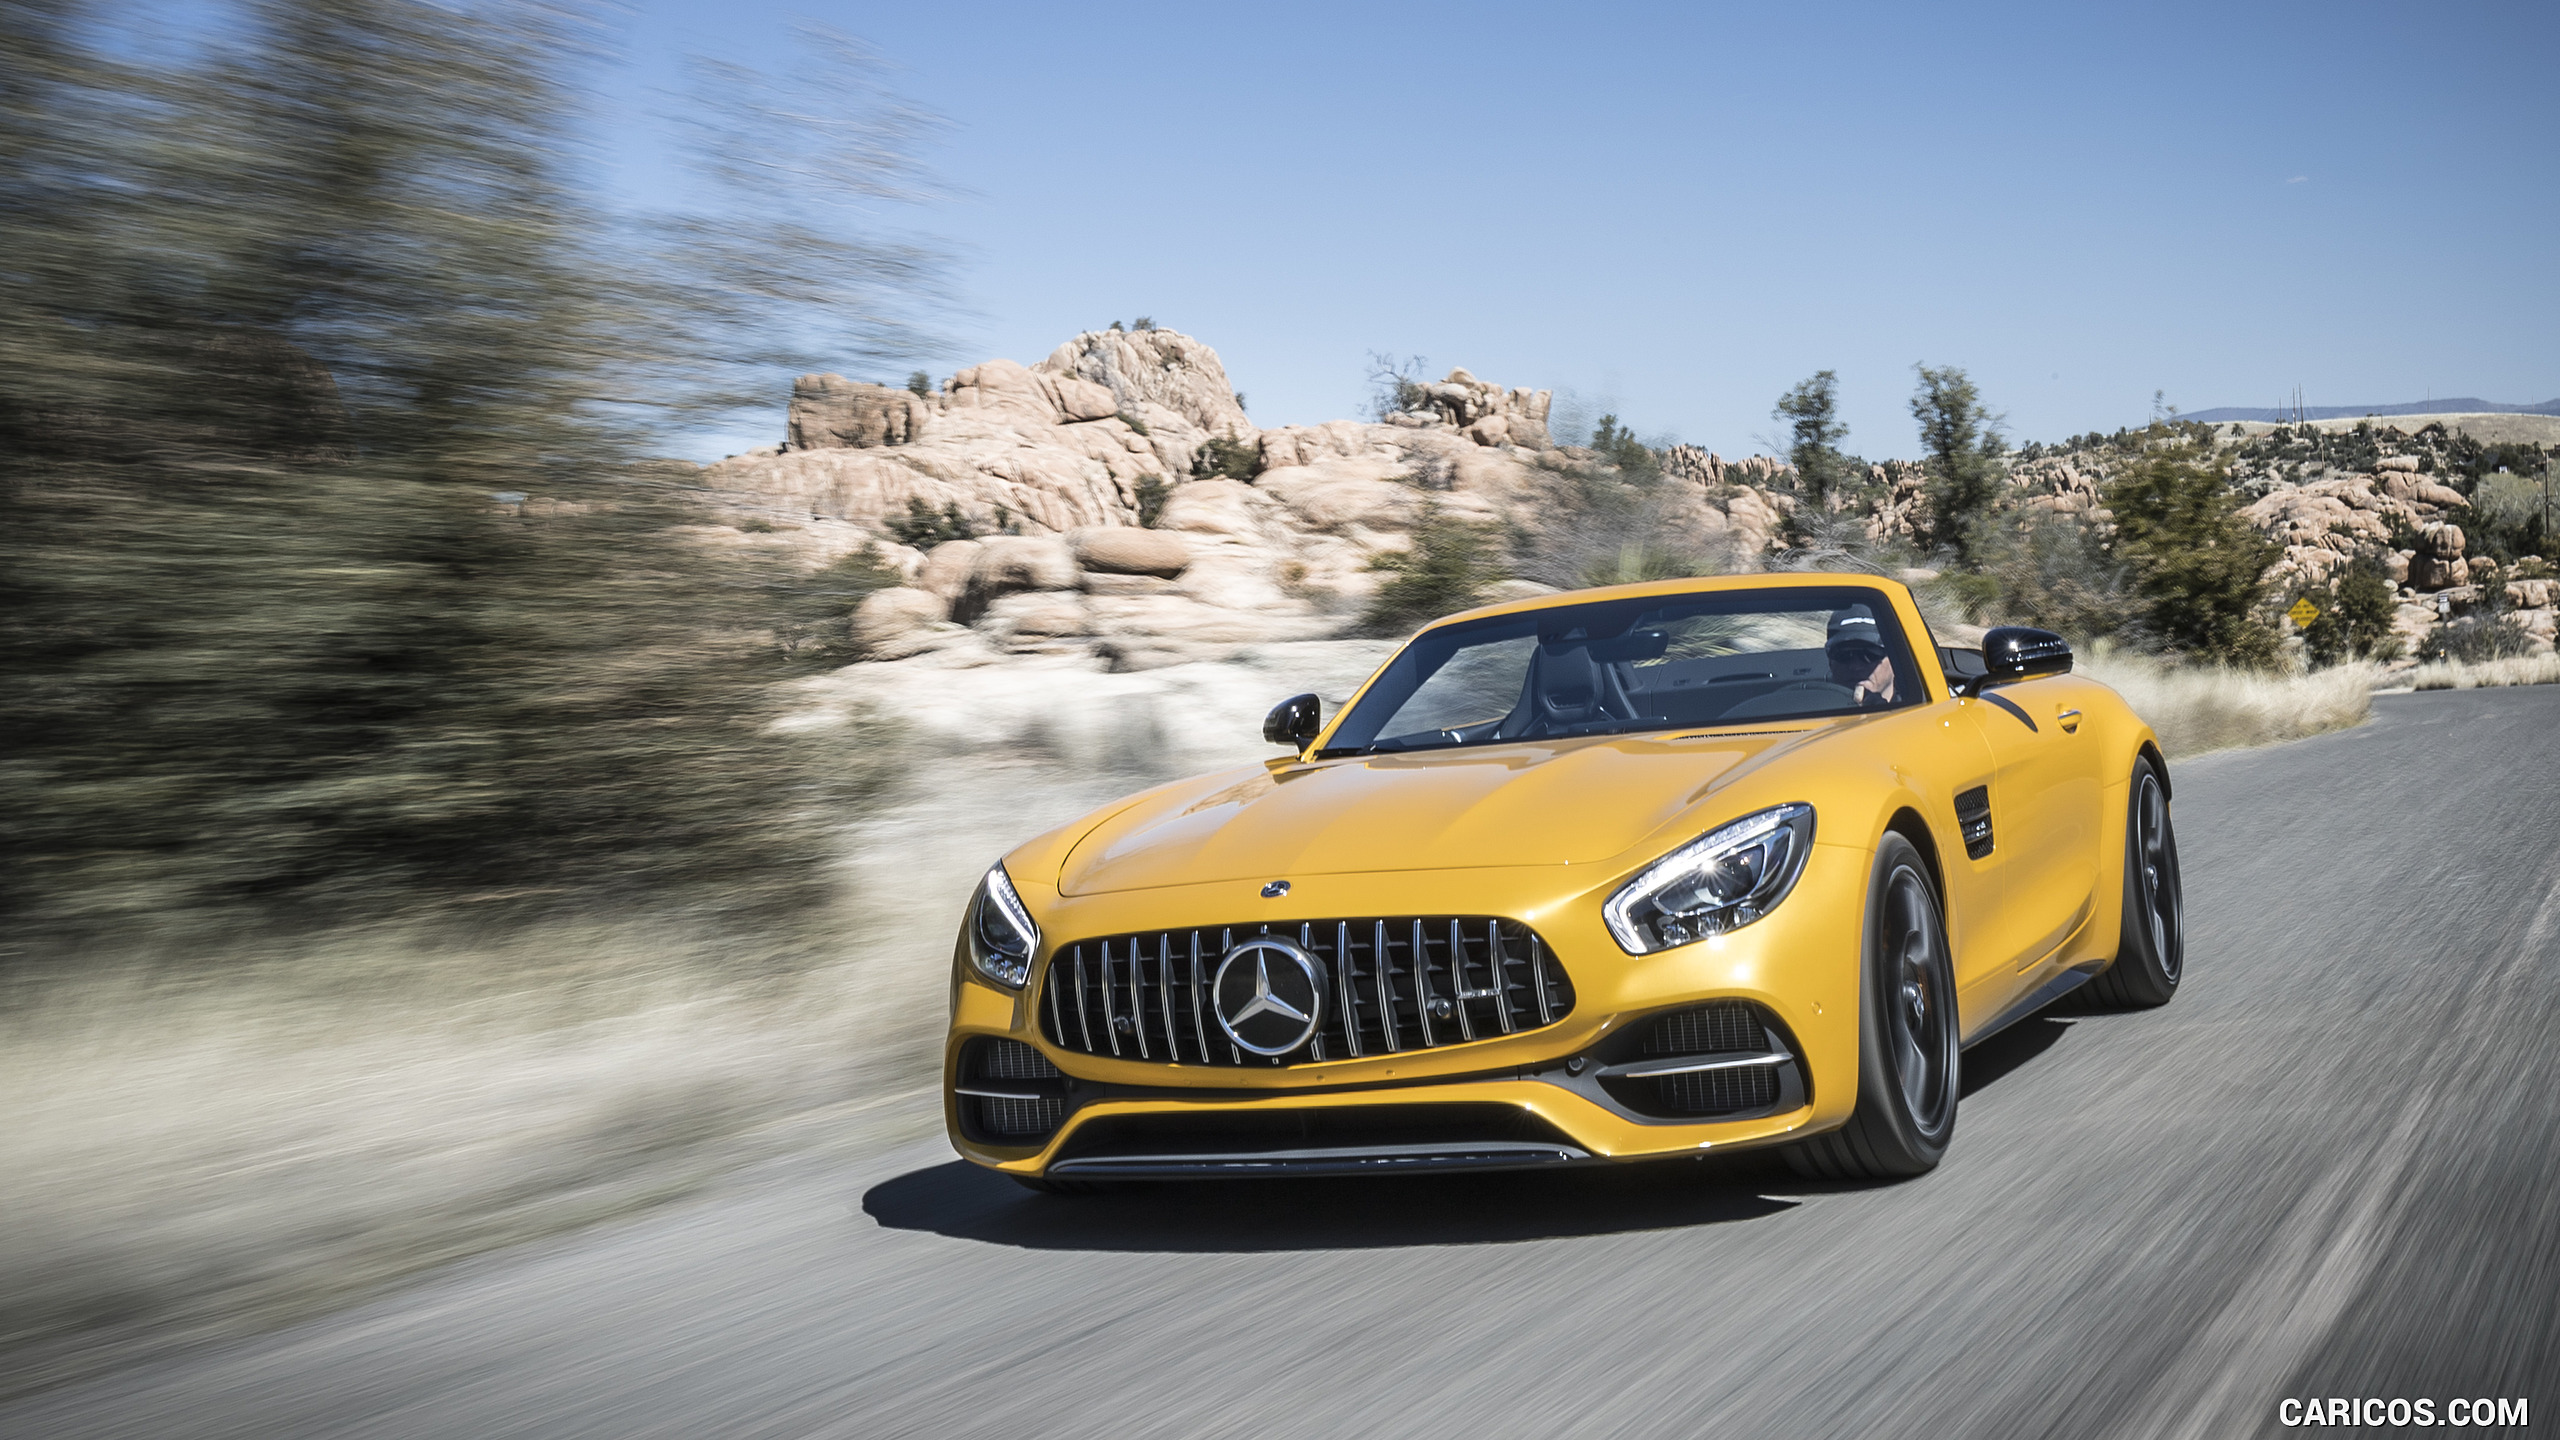 2018 Mercedes-AMG GT C Roadster - Front Three-Quarter, #197 of 350